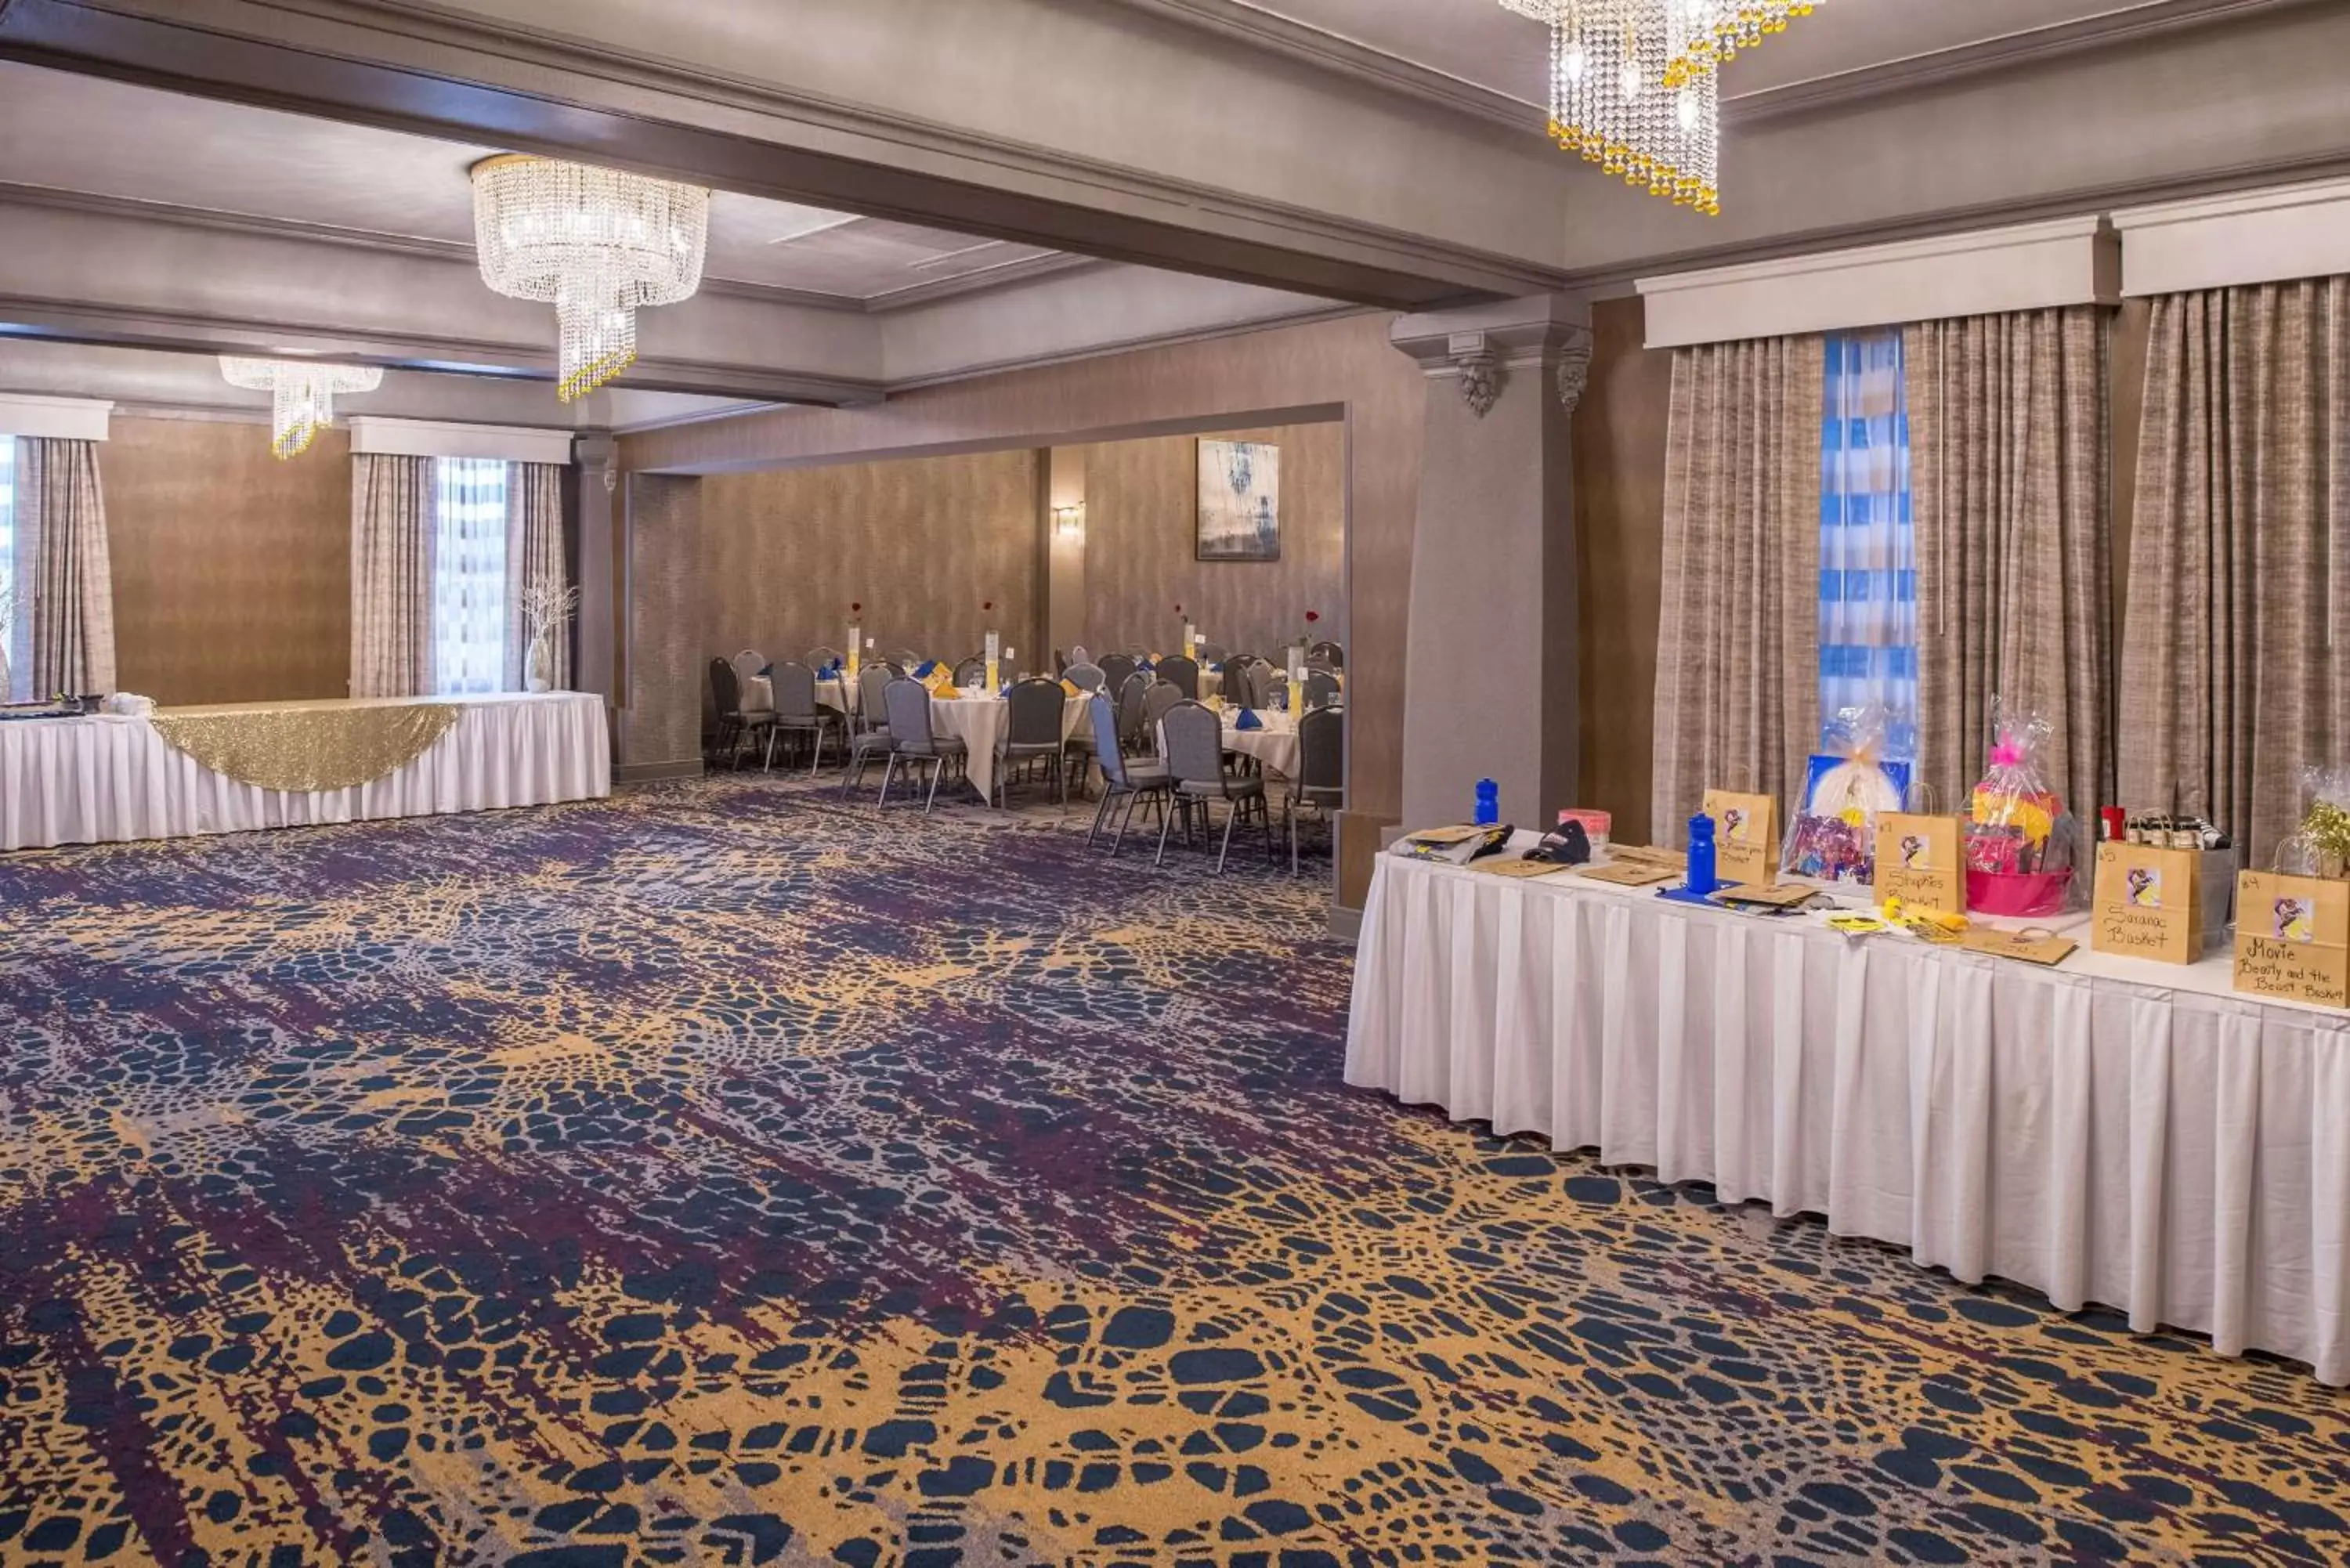 Meeting/conference room, Banquet Facilities in DoubleTree by Hilton Utica